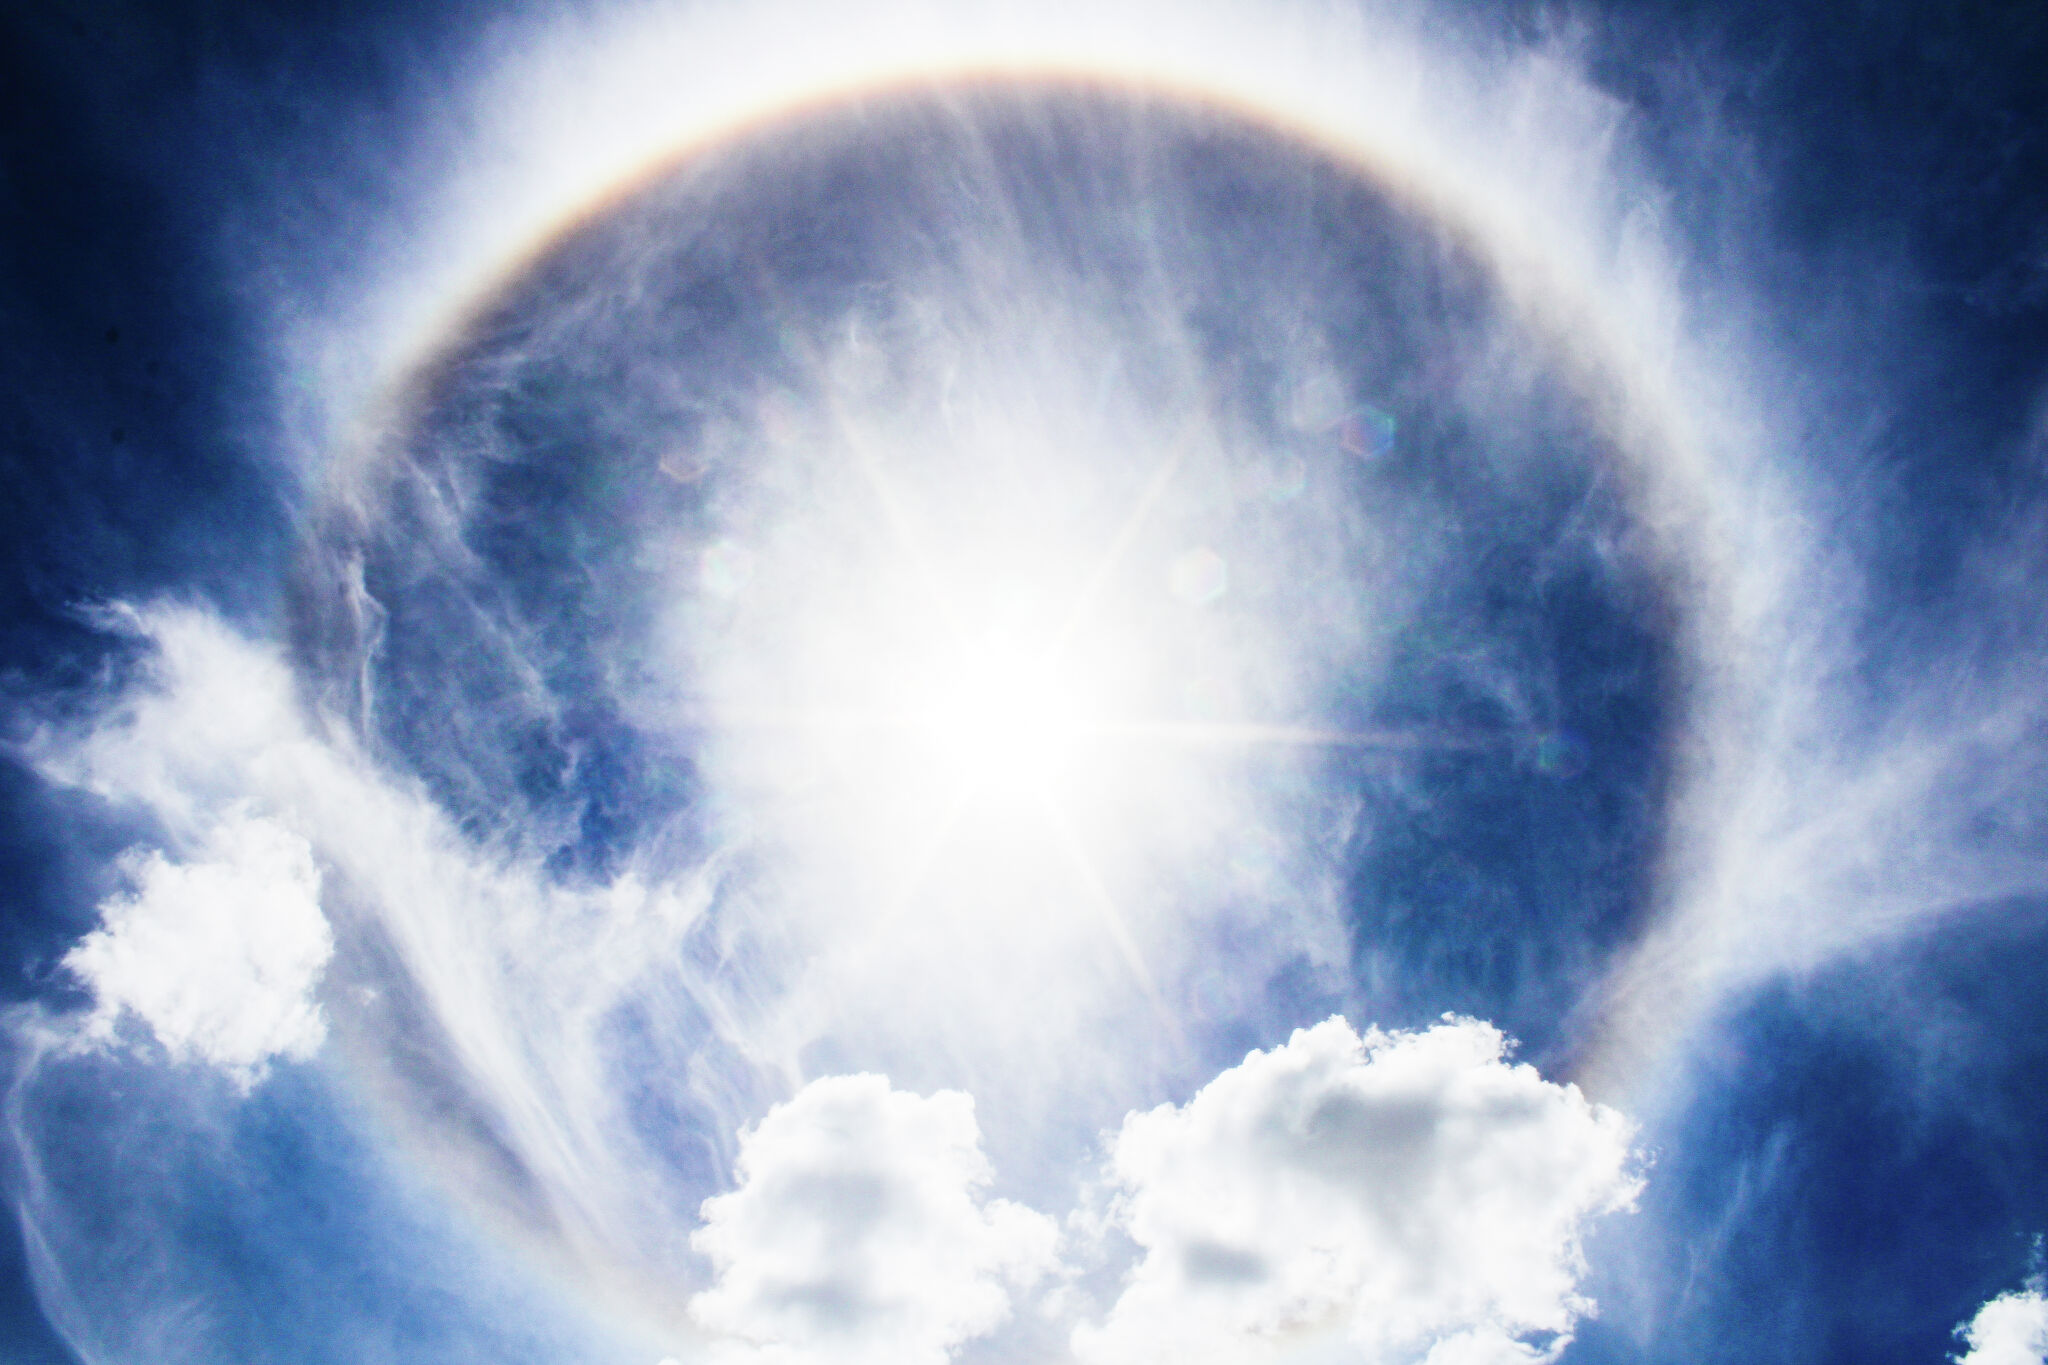 Sun Halo In The Sky The Sun Halo Is Circle Around The Sun Or The Moon Made  From Ice Crystals In The Sky It Is Rare Phenomenon High-Res Stock Photo -  Getty